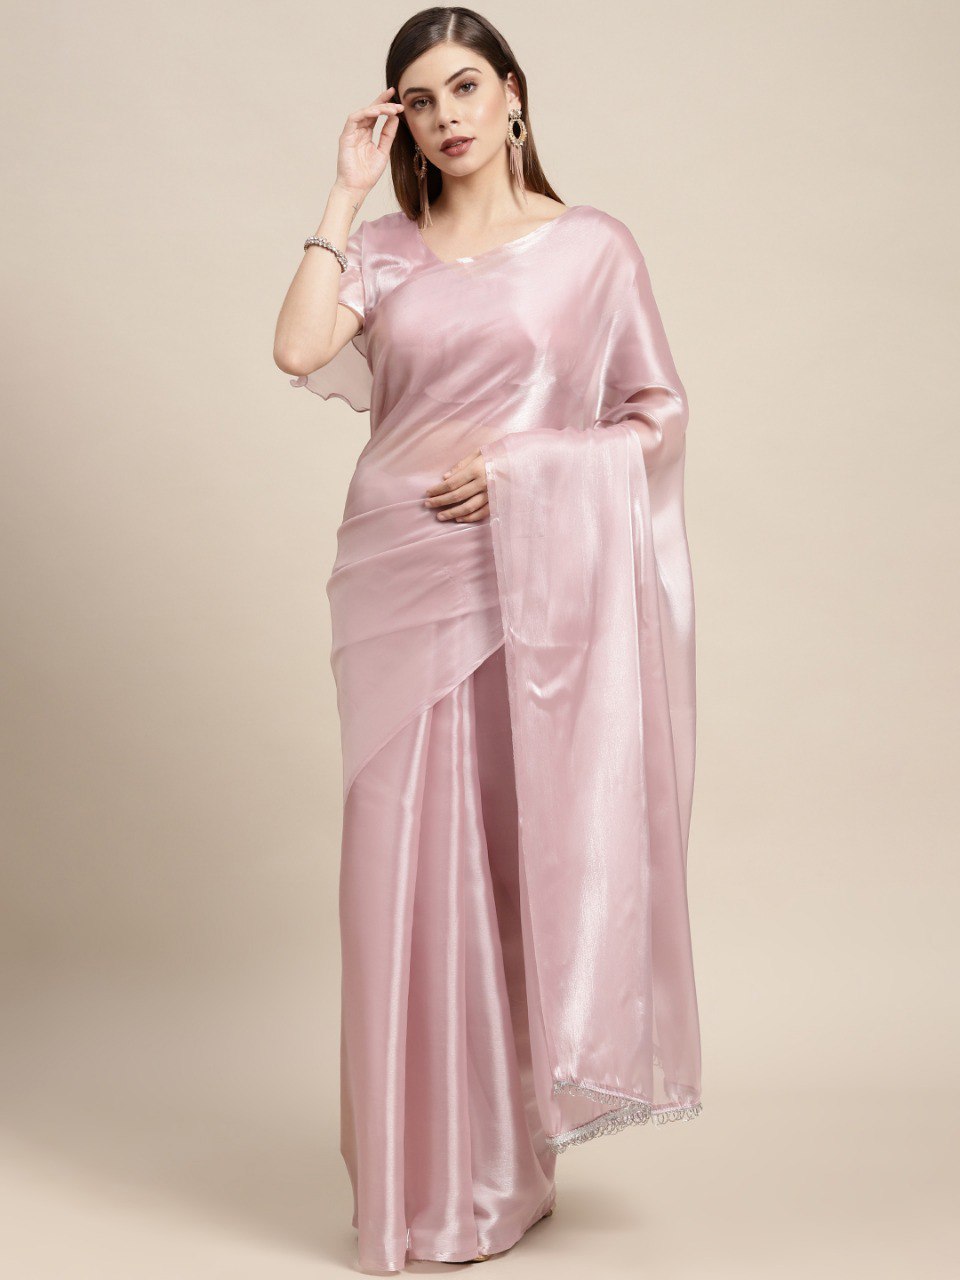 Buy Pink Color Latest Saree Collection Online in India